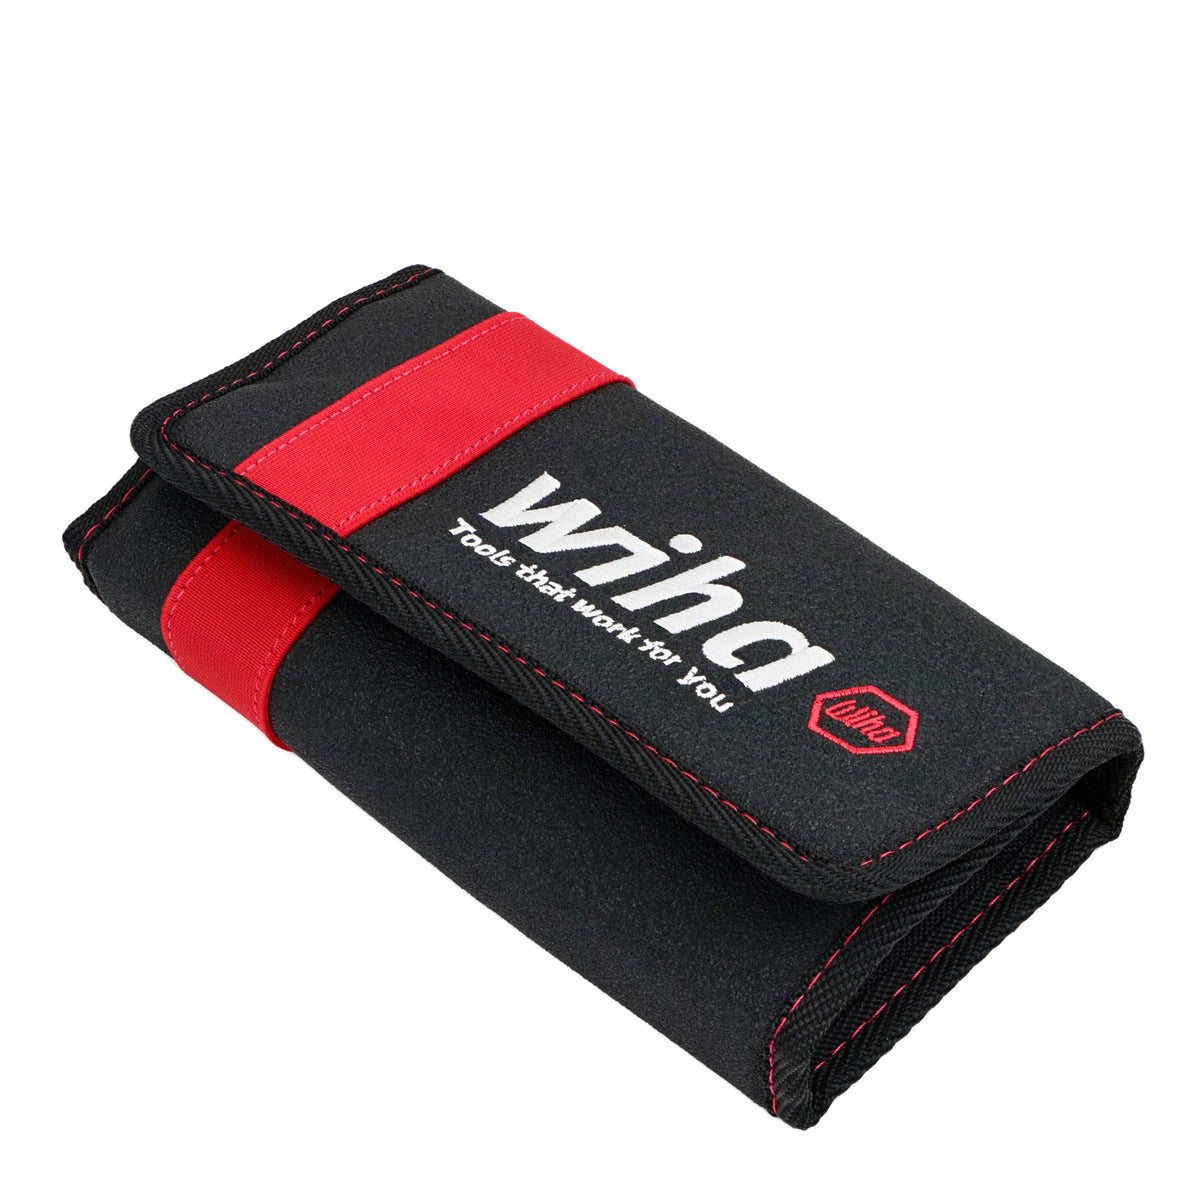 Wiha 91584 Premium Pouch for Insulated Torque Screwdrivers and SlimLine Blades